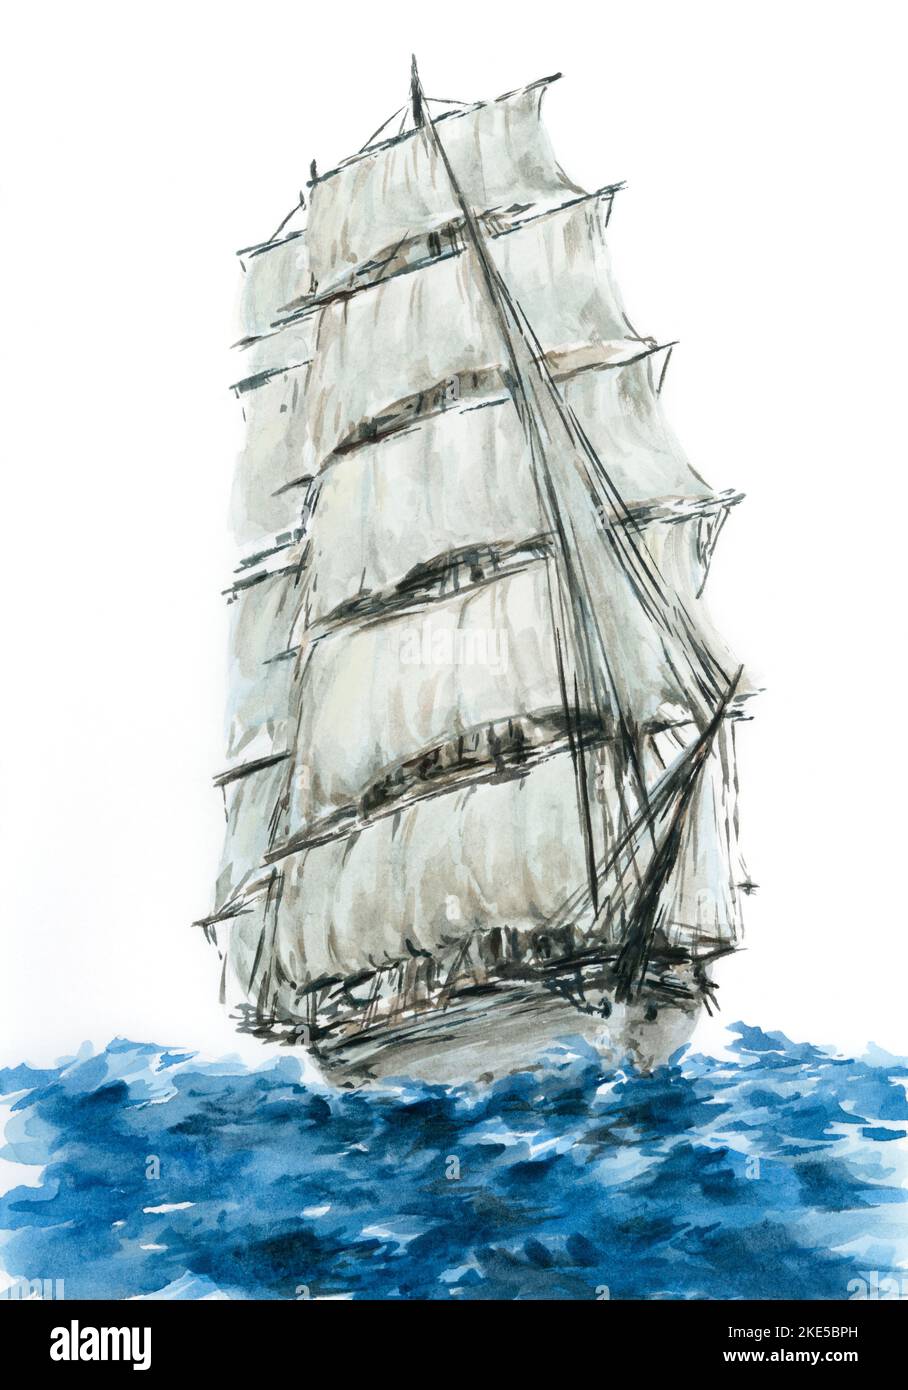 Sea-going ship-rigged frigate. Watercolor on paper. Stock Photo